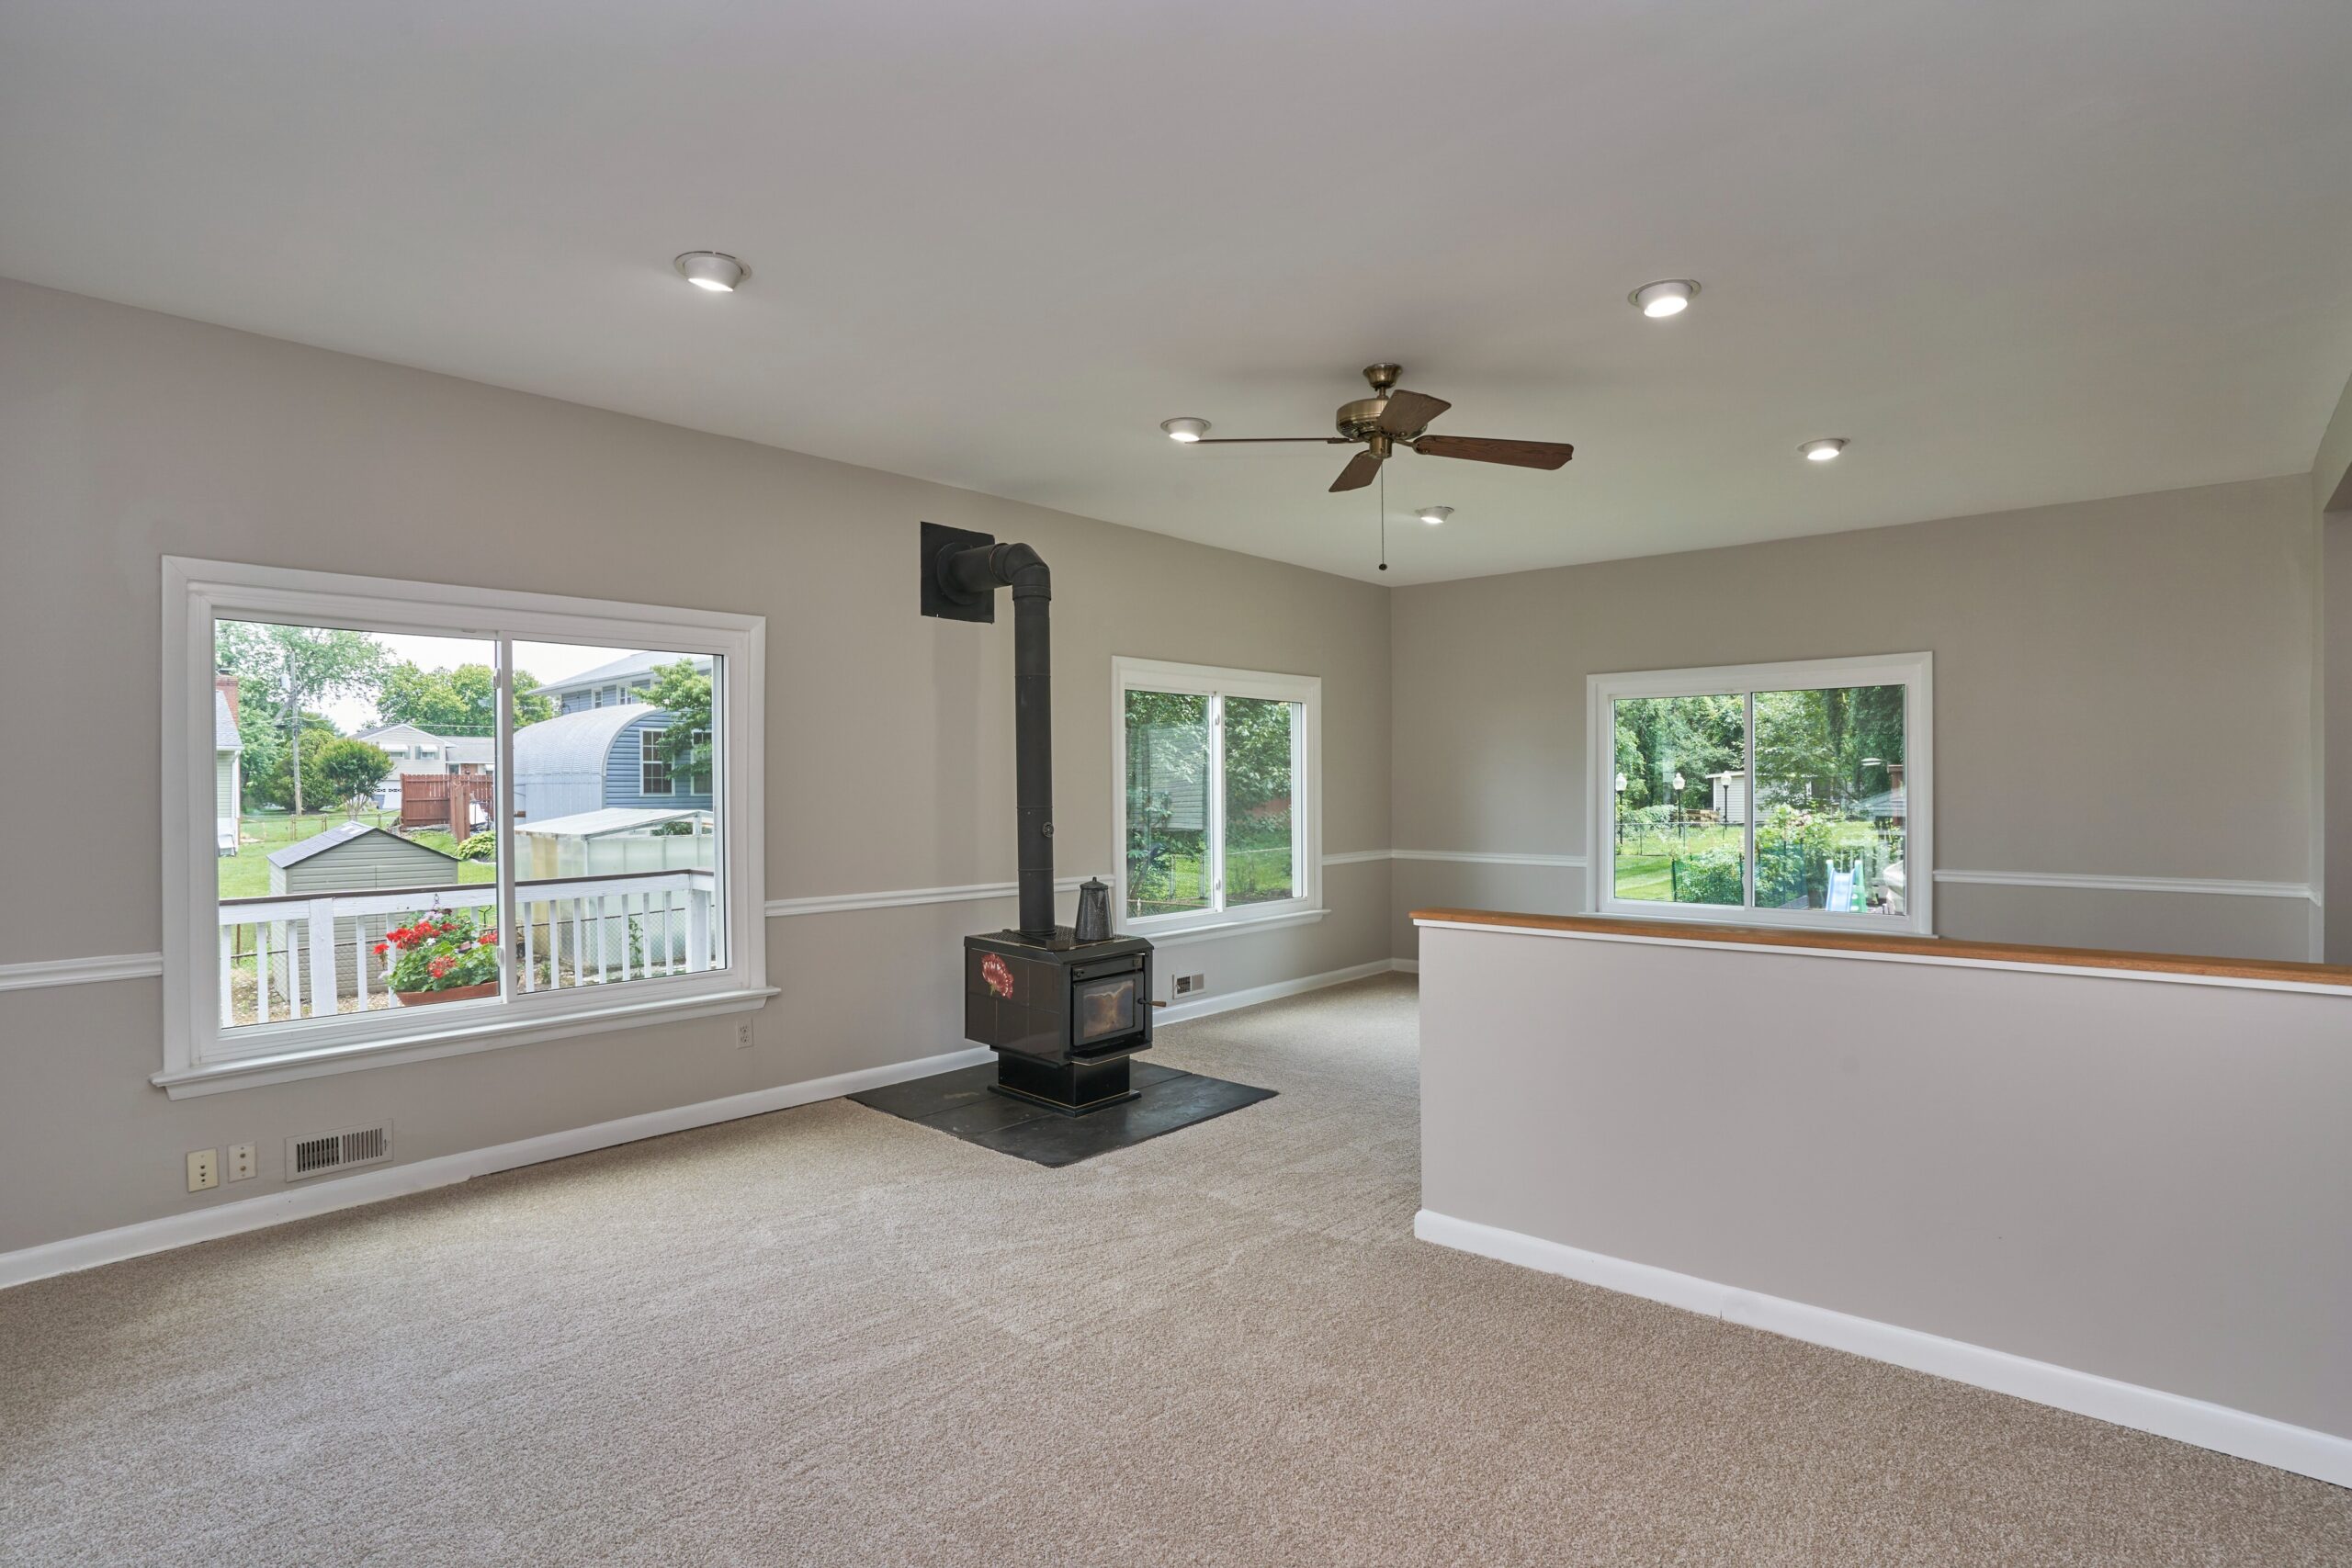 Professional interior photo of 5803 Sable Drive, Alexandria, VA - showing the recessed living room which is a step down from the kitchen in the rear addition. The woodstove is visible and a half-height partition divides the large space